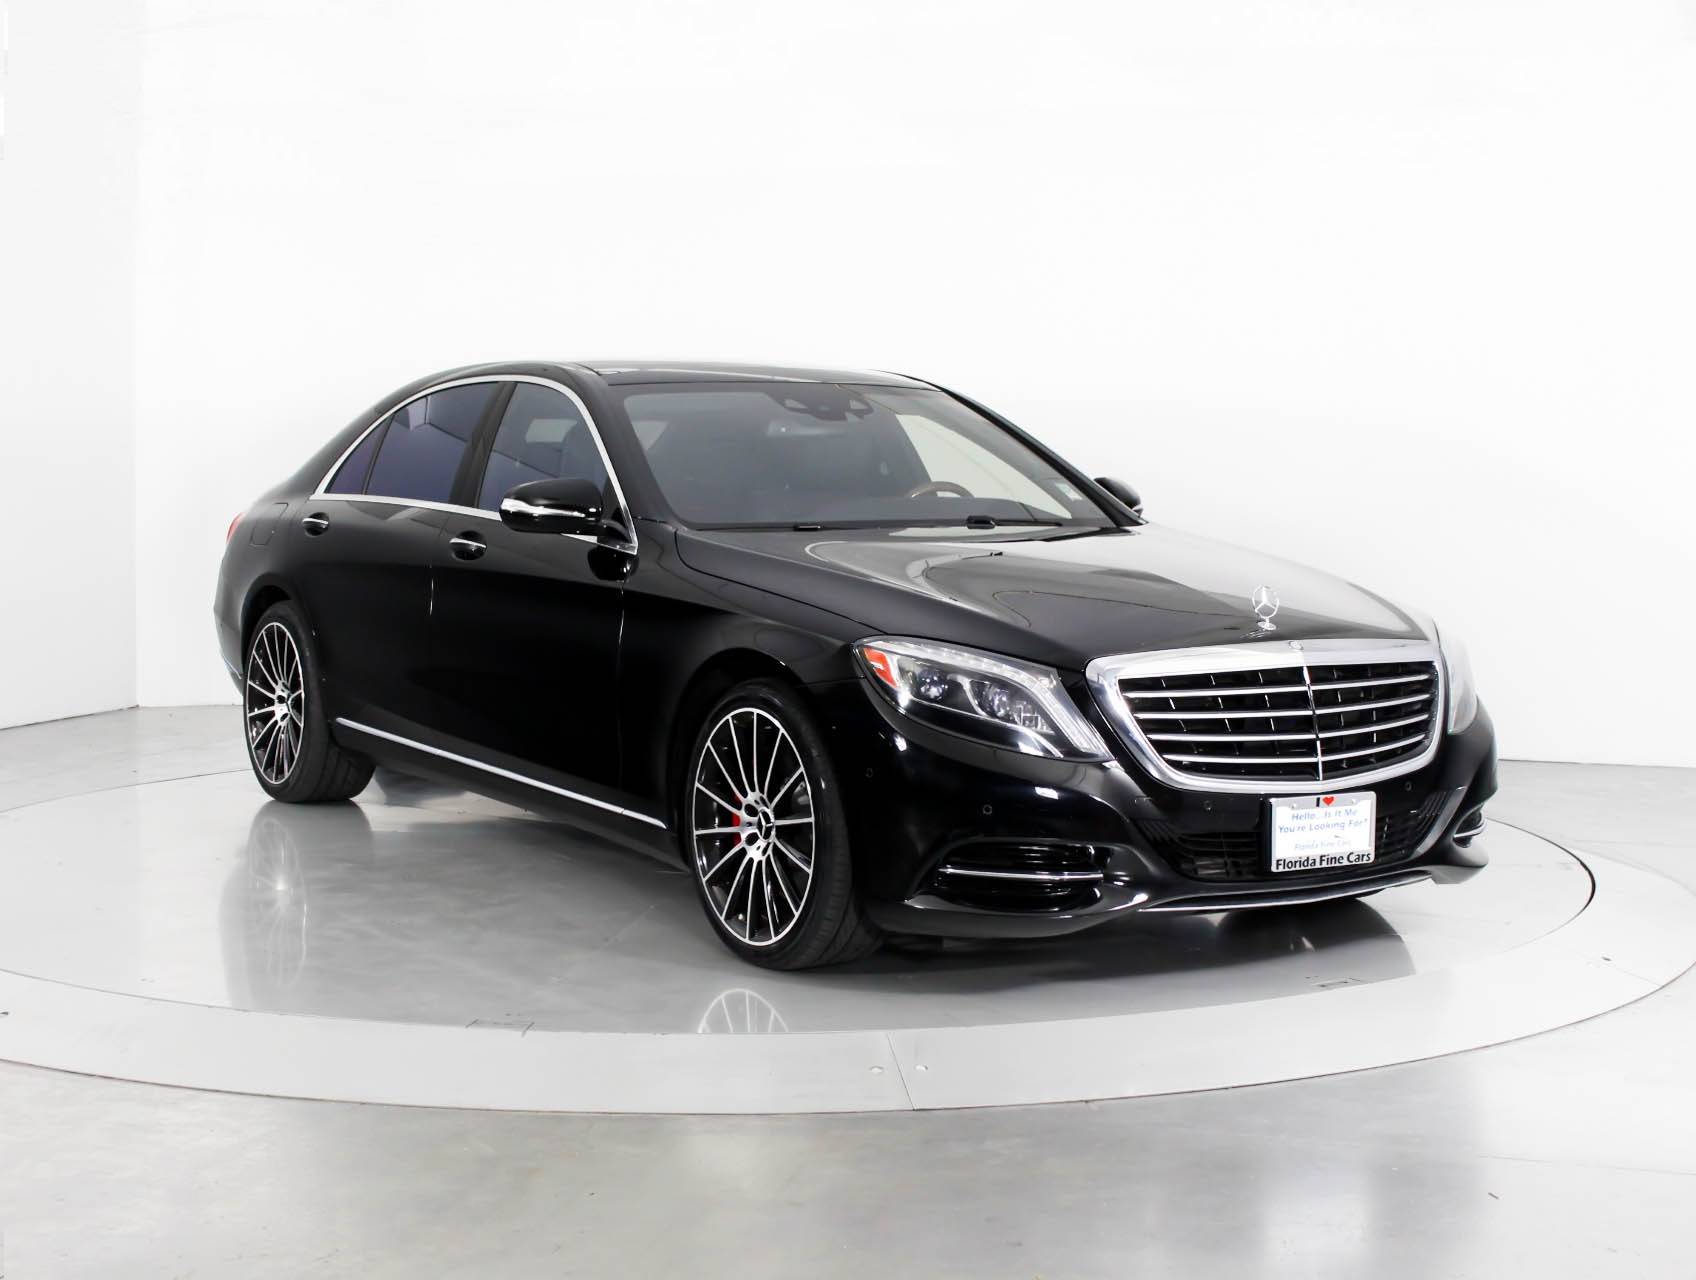 Florida Fine Cars - Used MERCEDES-BENZ S CLASS 2014 HOLLYWOOD S550 4MATIC